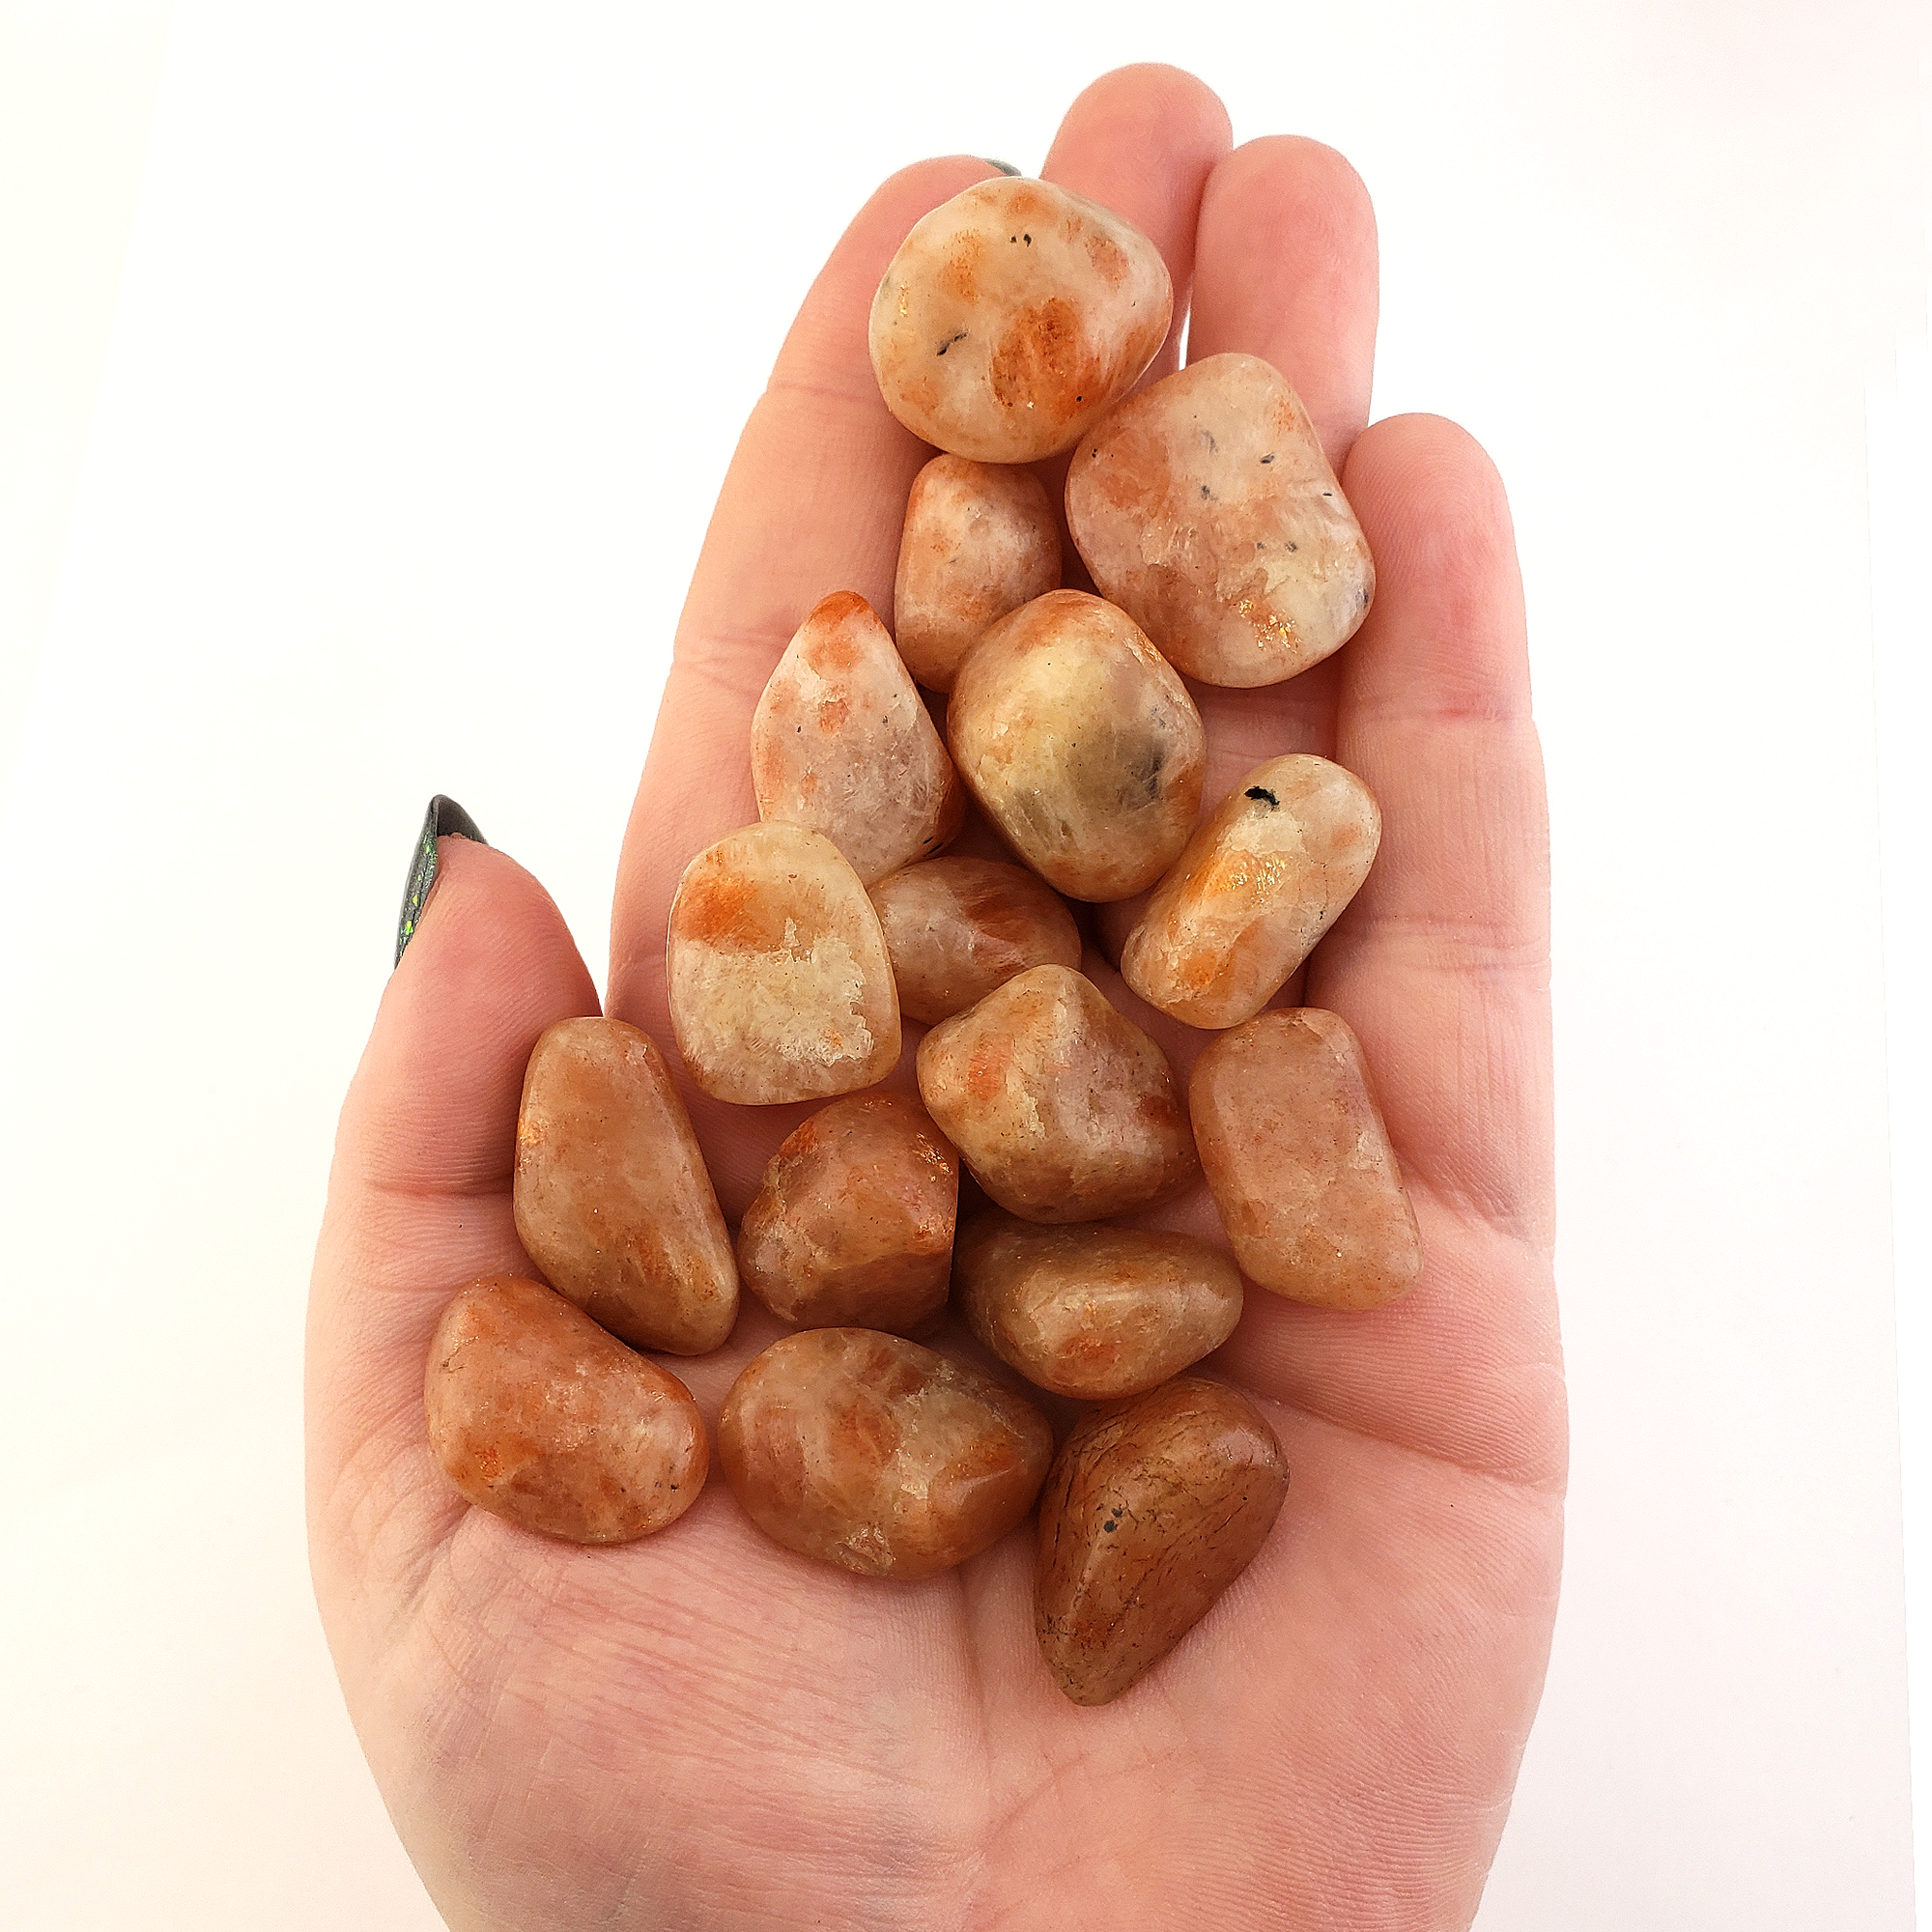 Sunstone Natural Tumbled Stone - Small One Stone - In Hand White Background 3